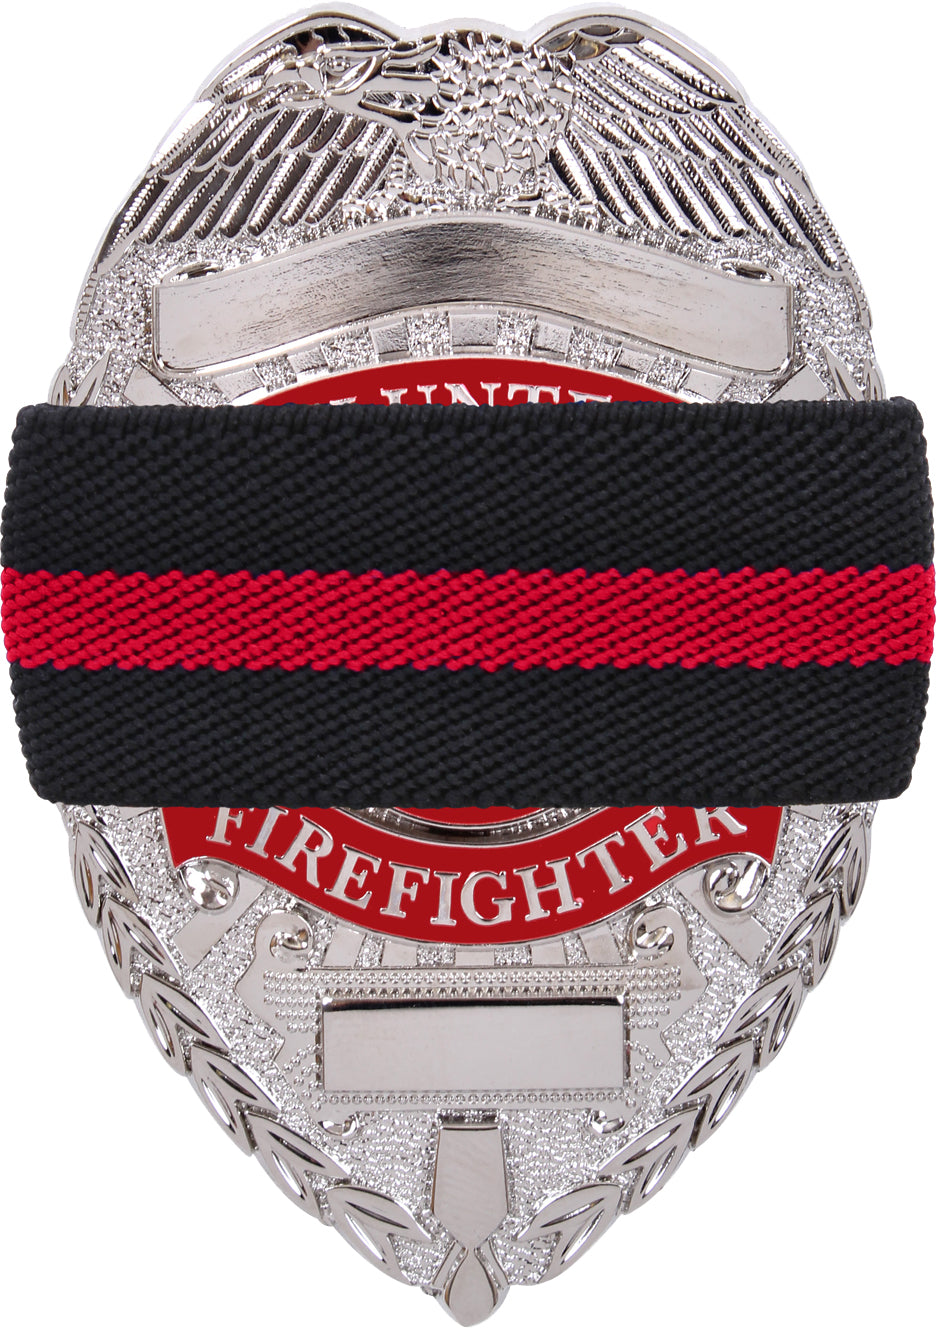 Black - Thin Red Line Support the Fire Department Mourning Band